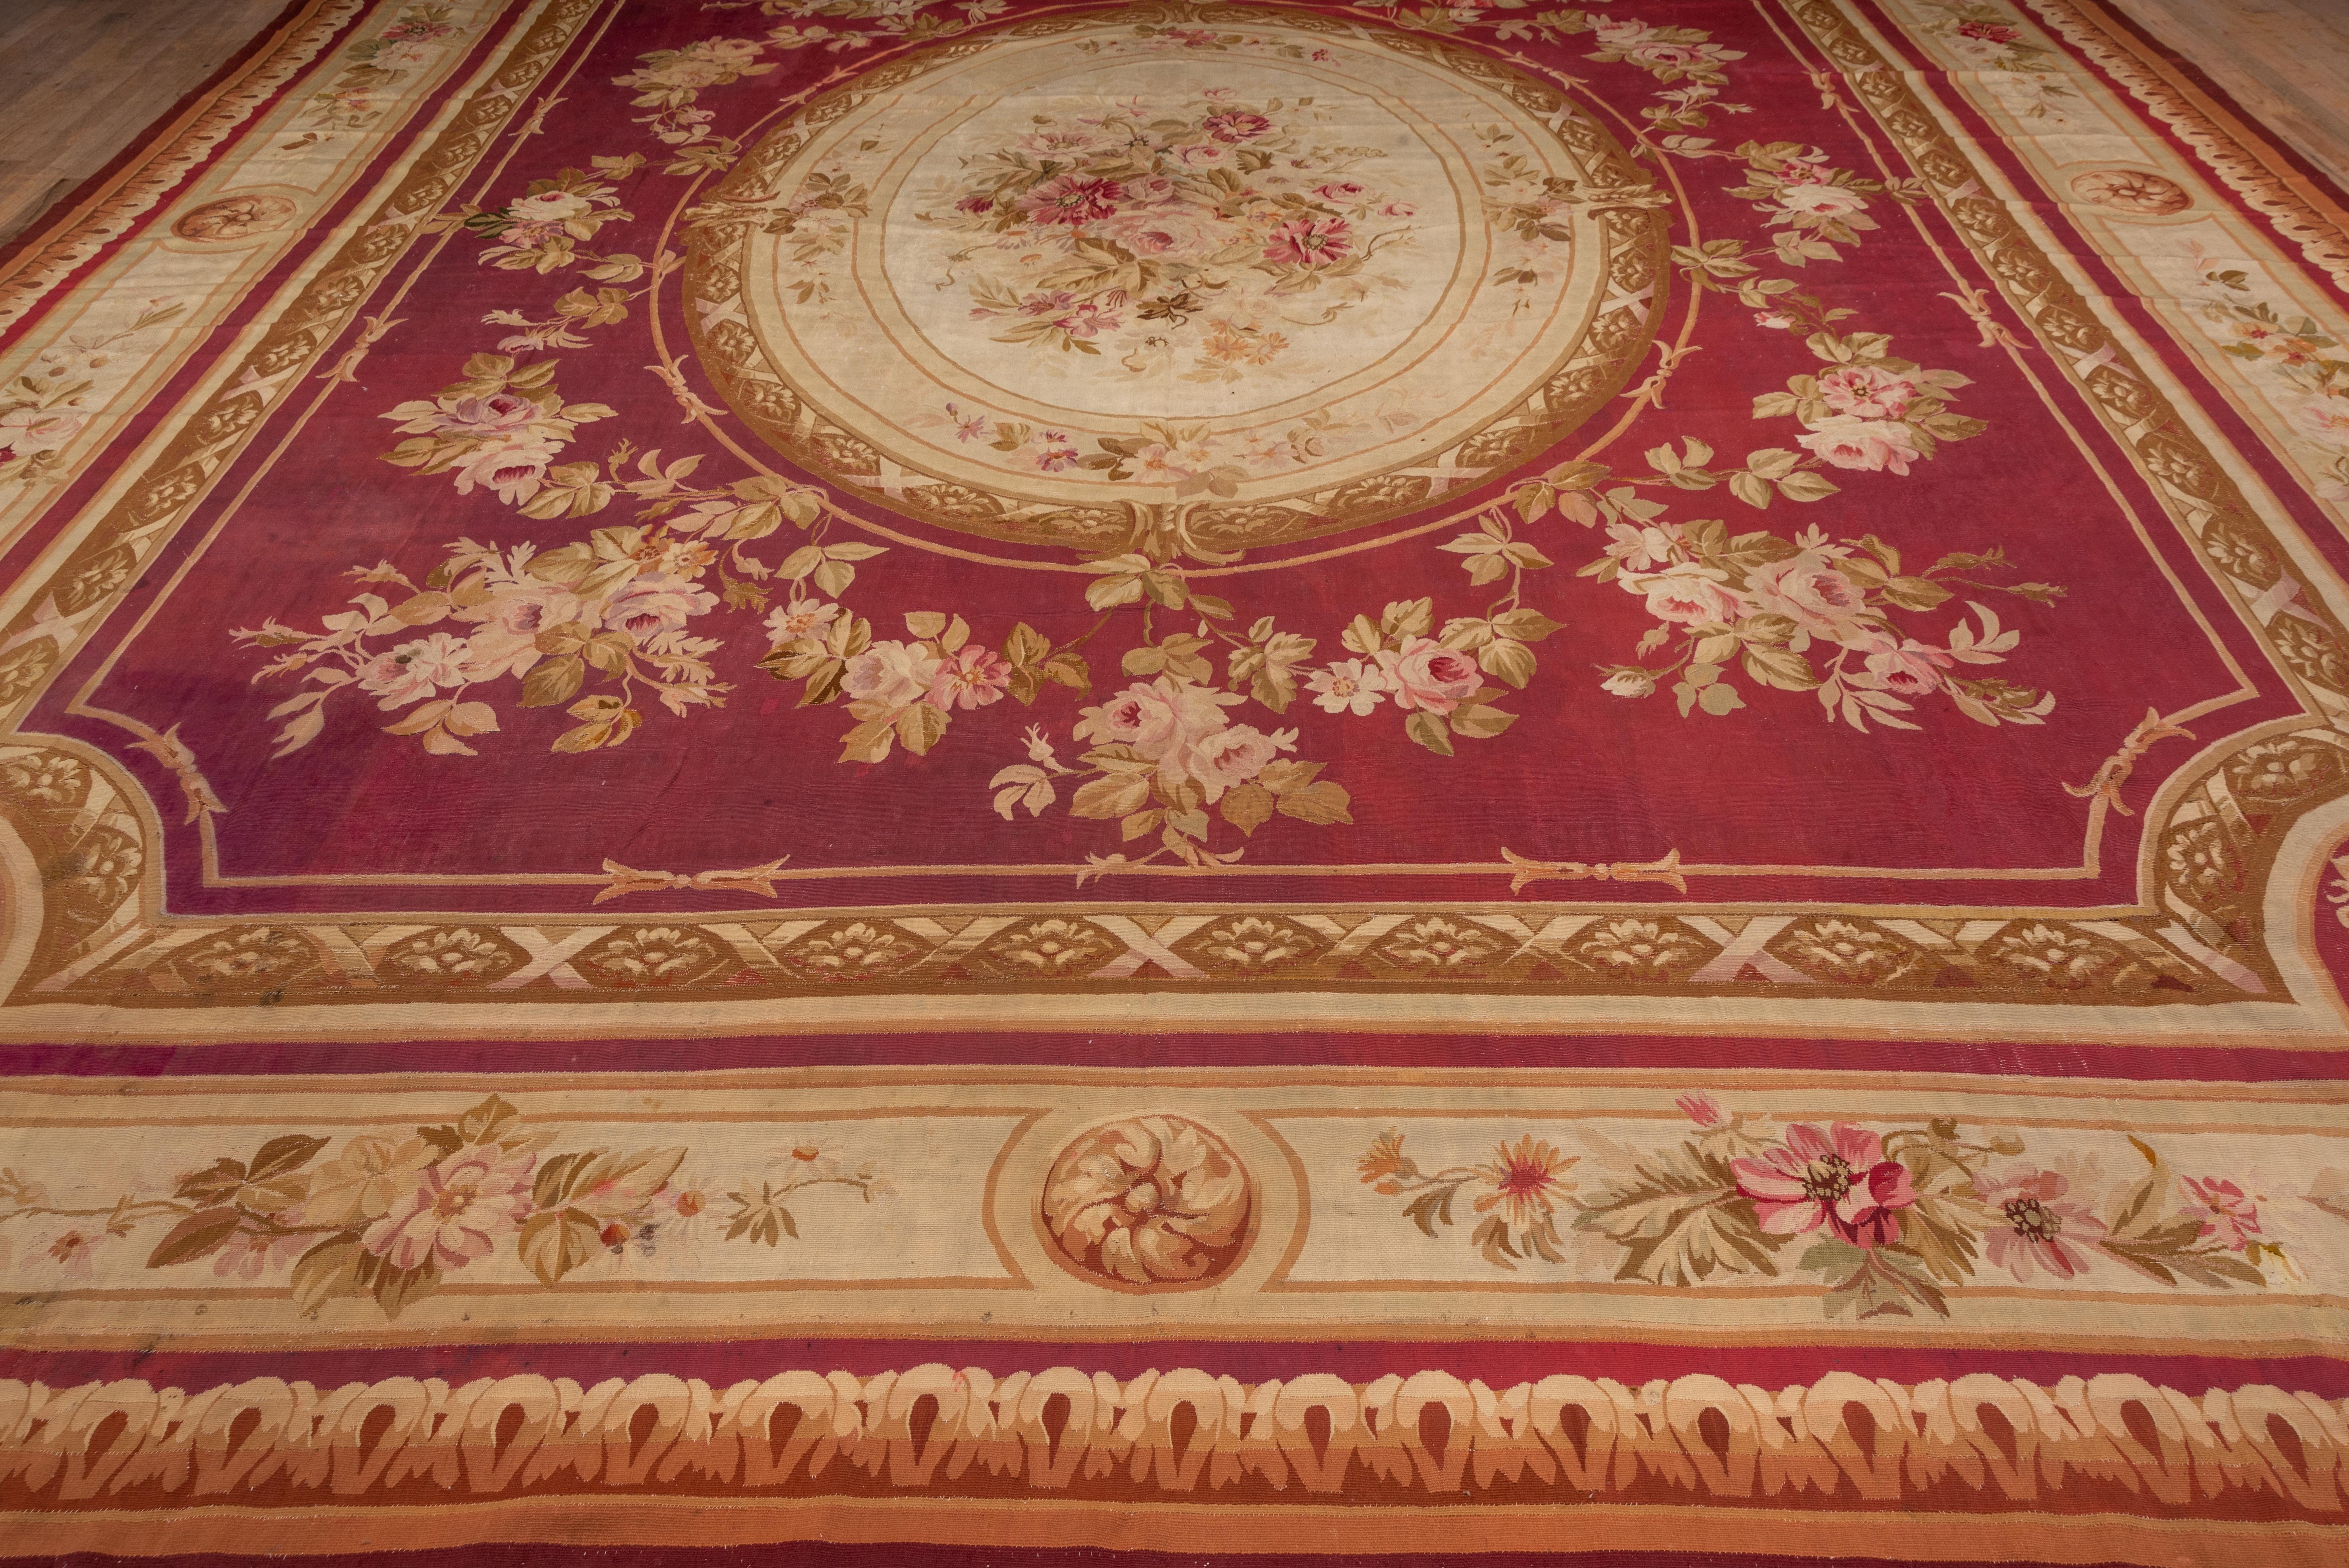 Fit for a Rothschild, this large antique French tapestry-woven carpet shows a large, layered oval medallion with an ivory central panel enclosing a detailed rose bouquet., all on a shaped red field with rose bouquets and swags, set with a cream main